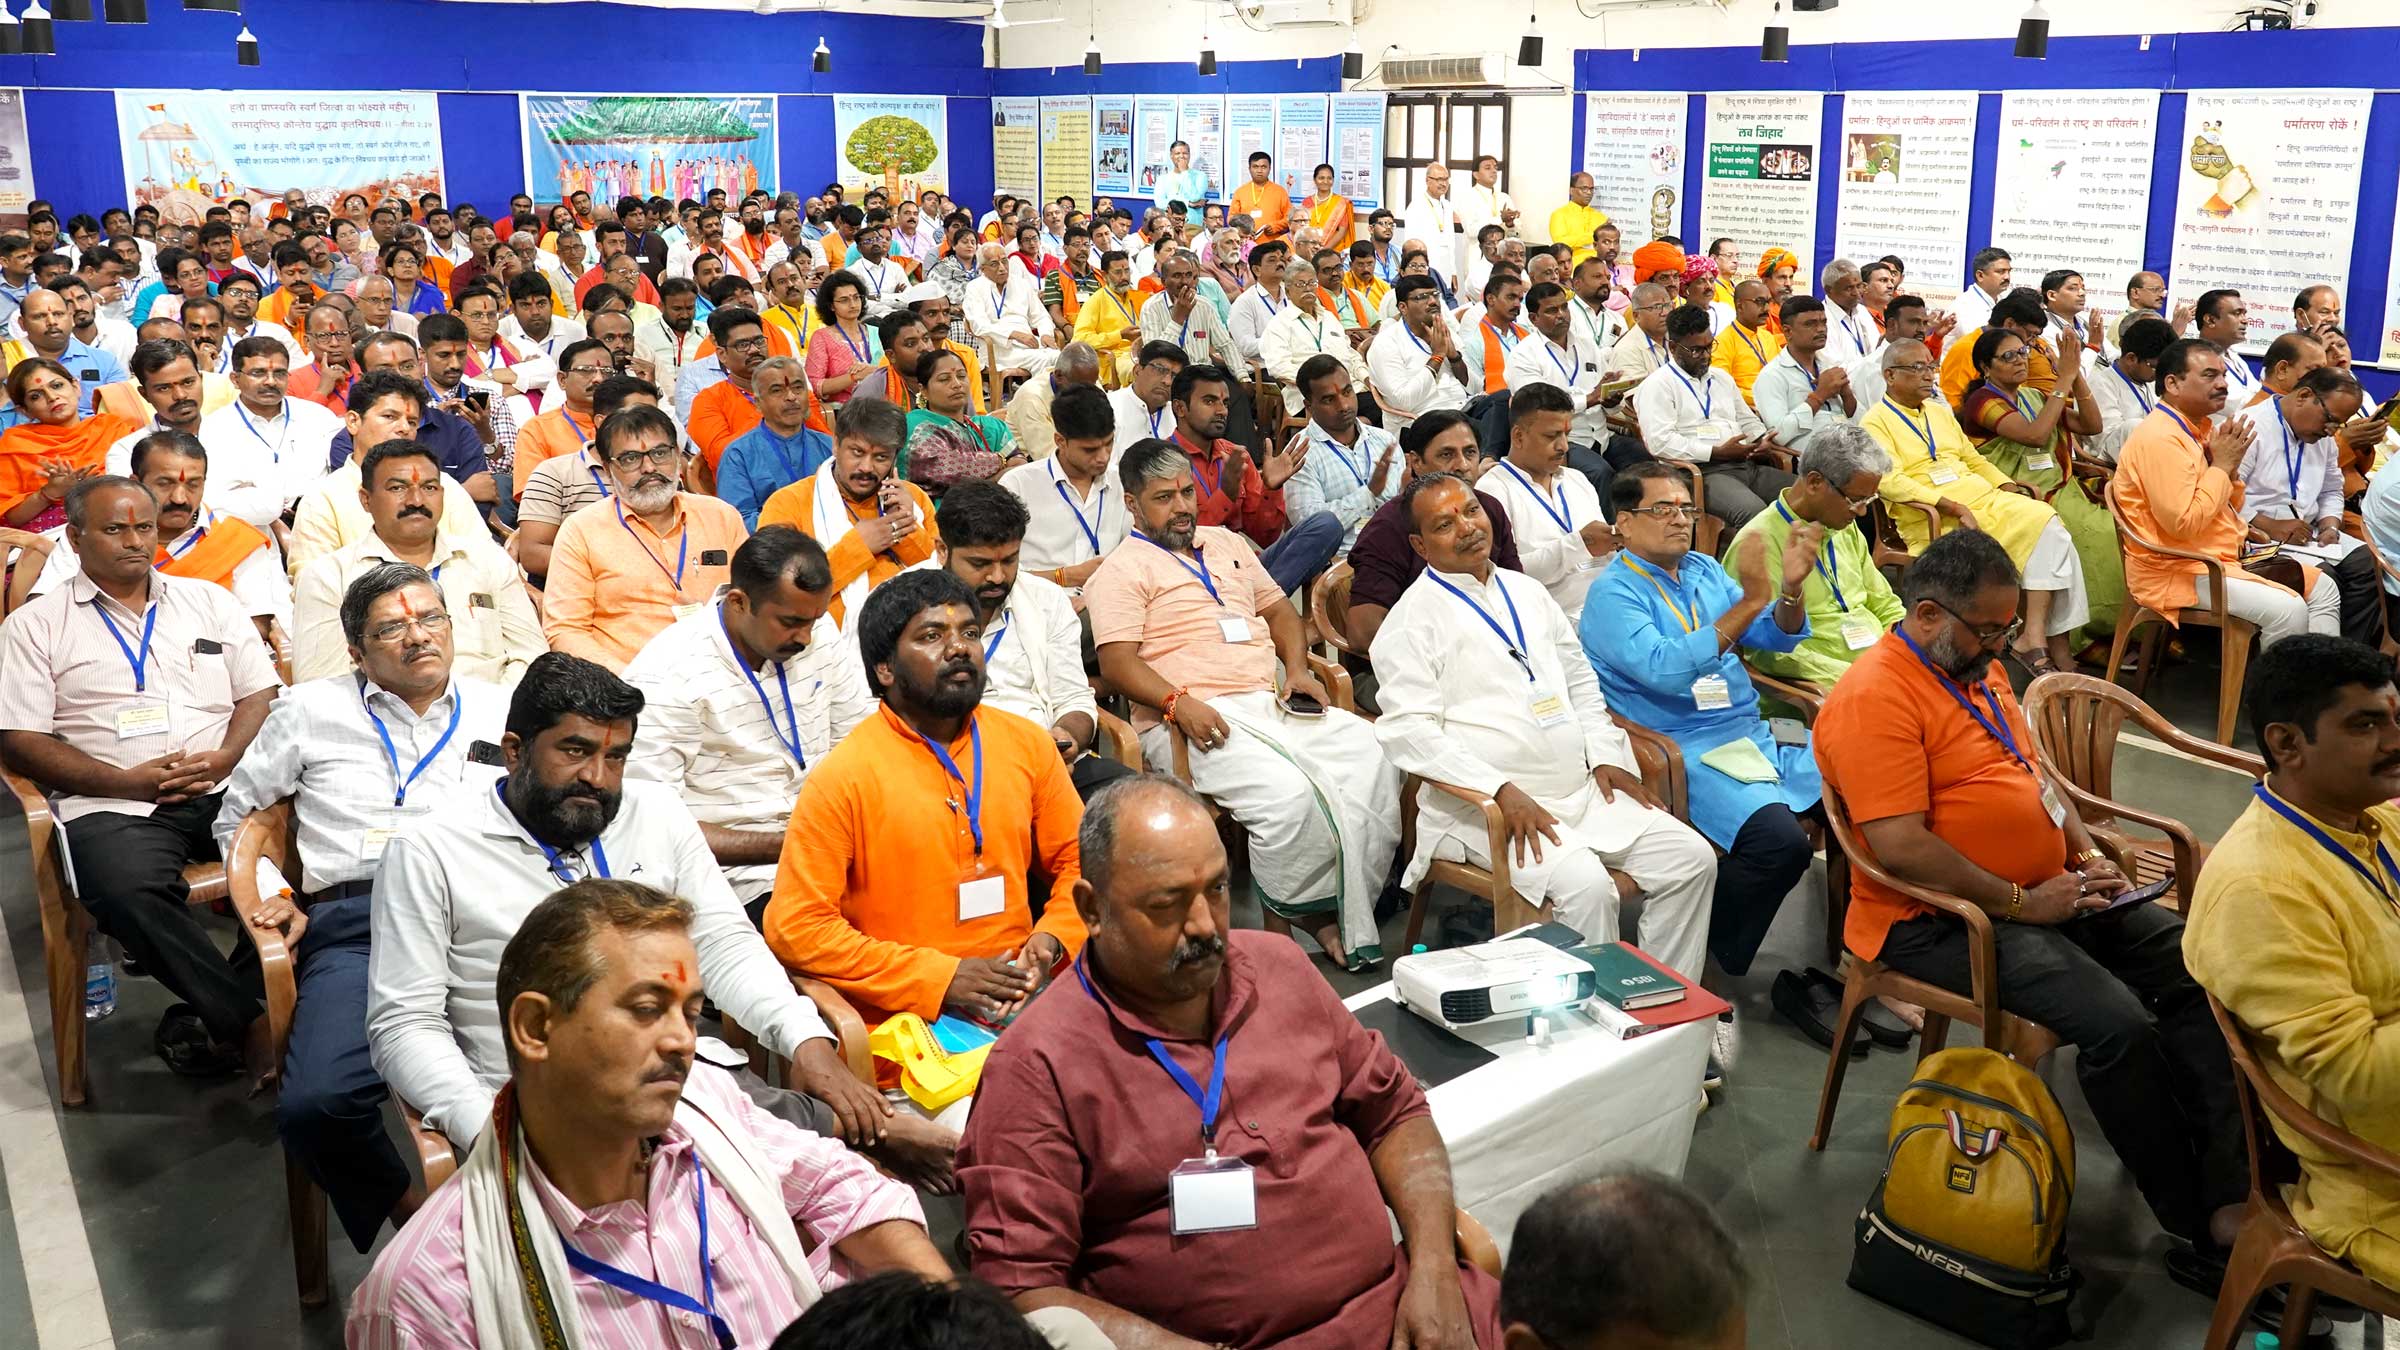 Devout Hindus listening to the speeches of dignitaries in rapt attention